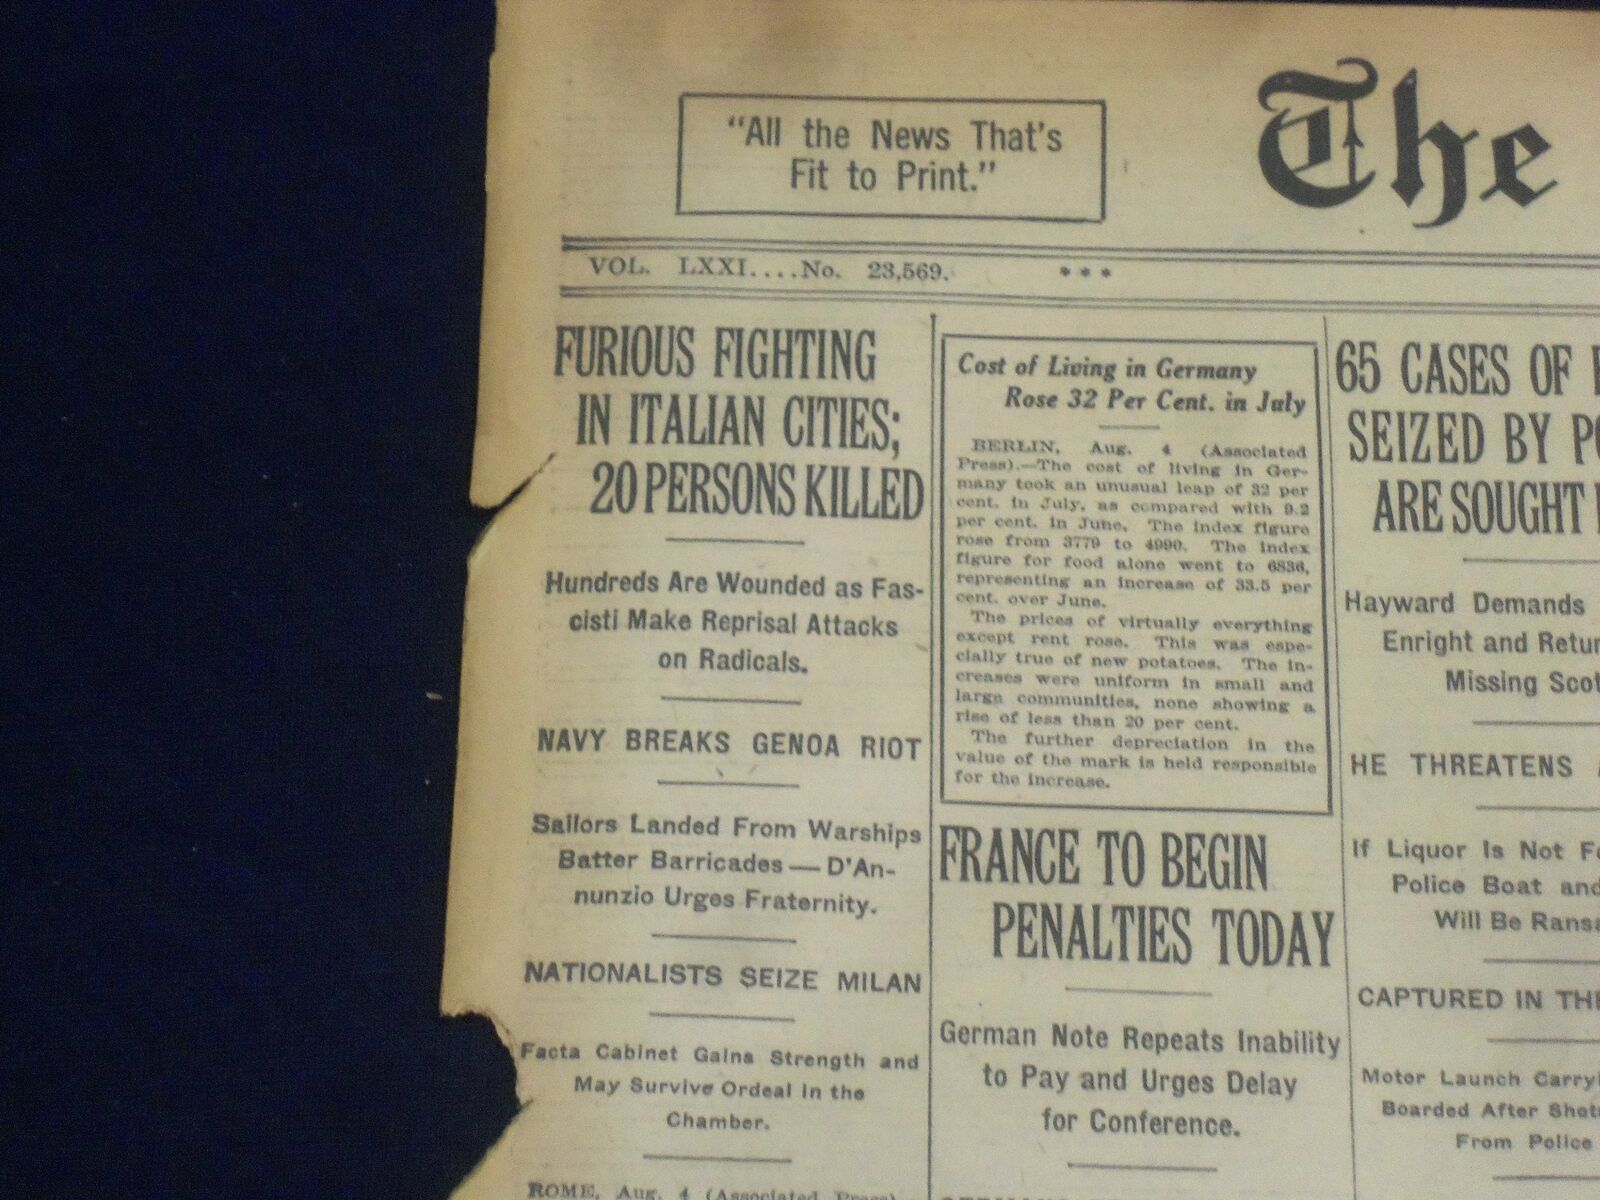 1922 AUGUST 5 NEW YORK TIMES - FURIOUS FIGHTING IN ITALIAN CITIES - NT 8363